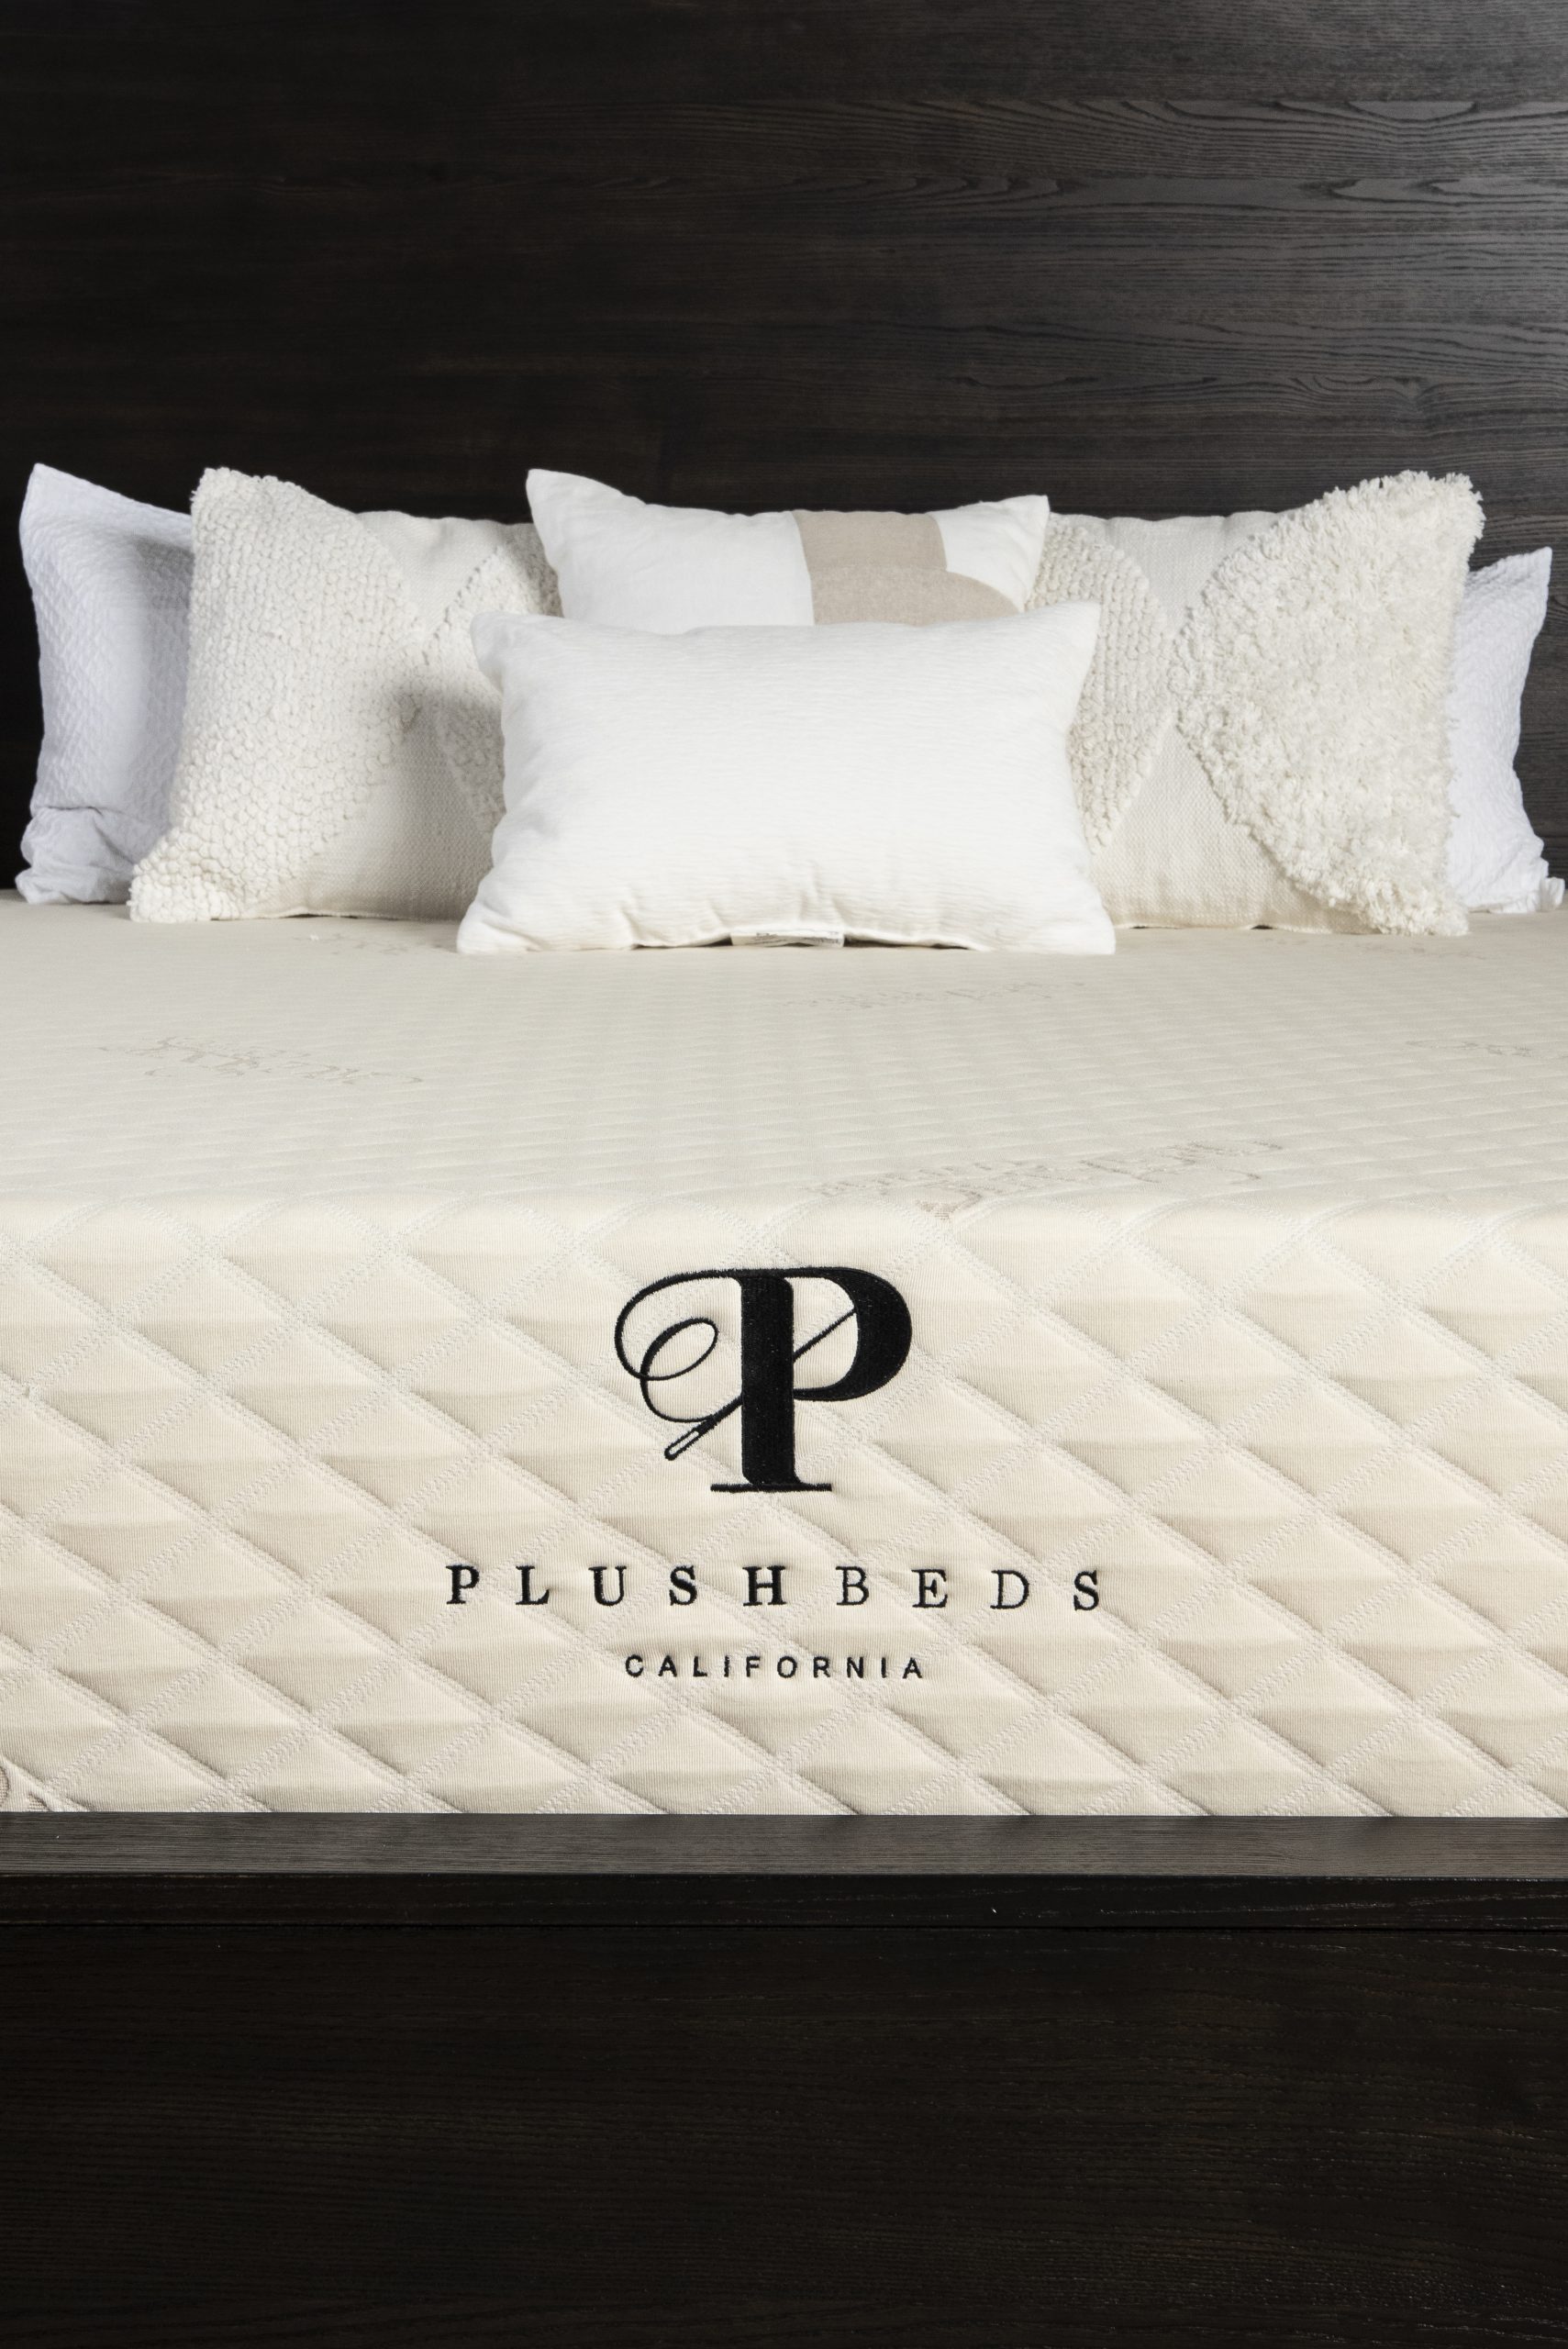 Which Firmness and Thickness are Best suited for your Body and Sleeping Style?